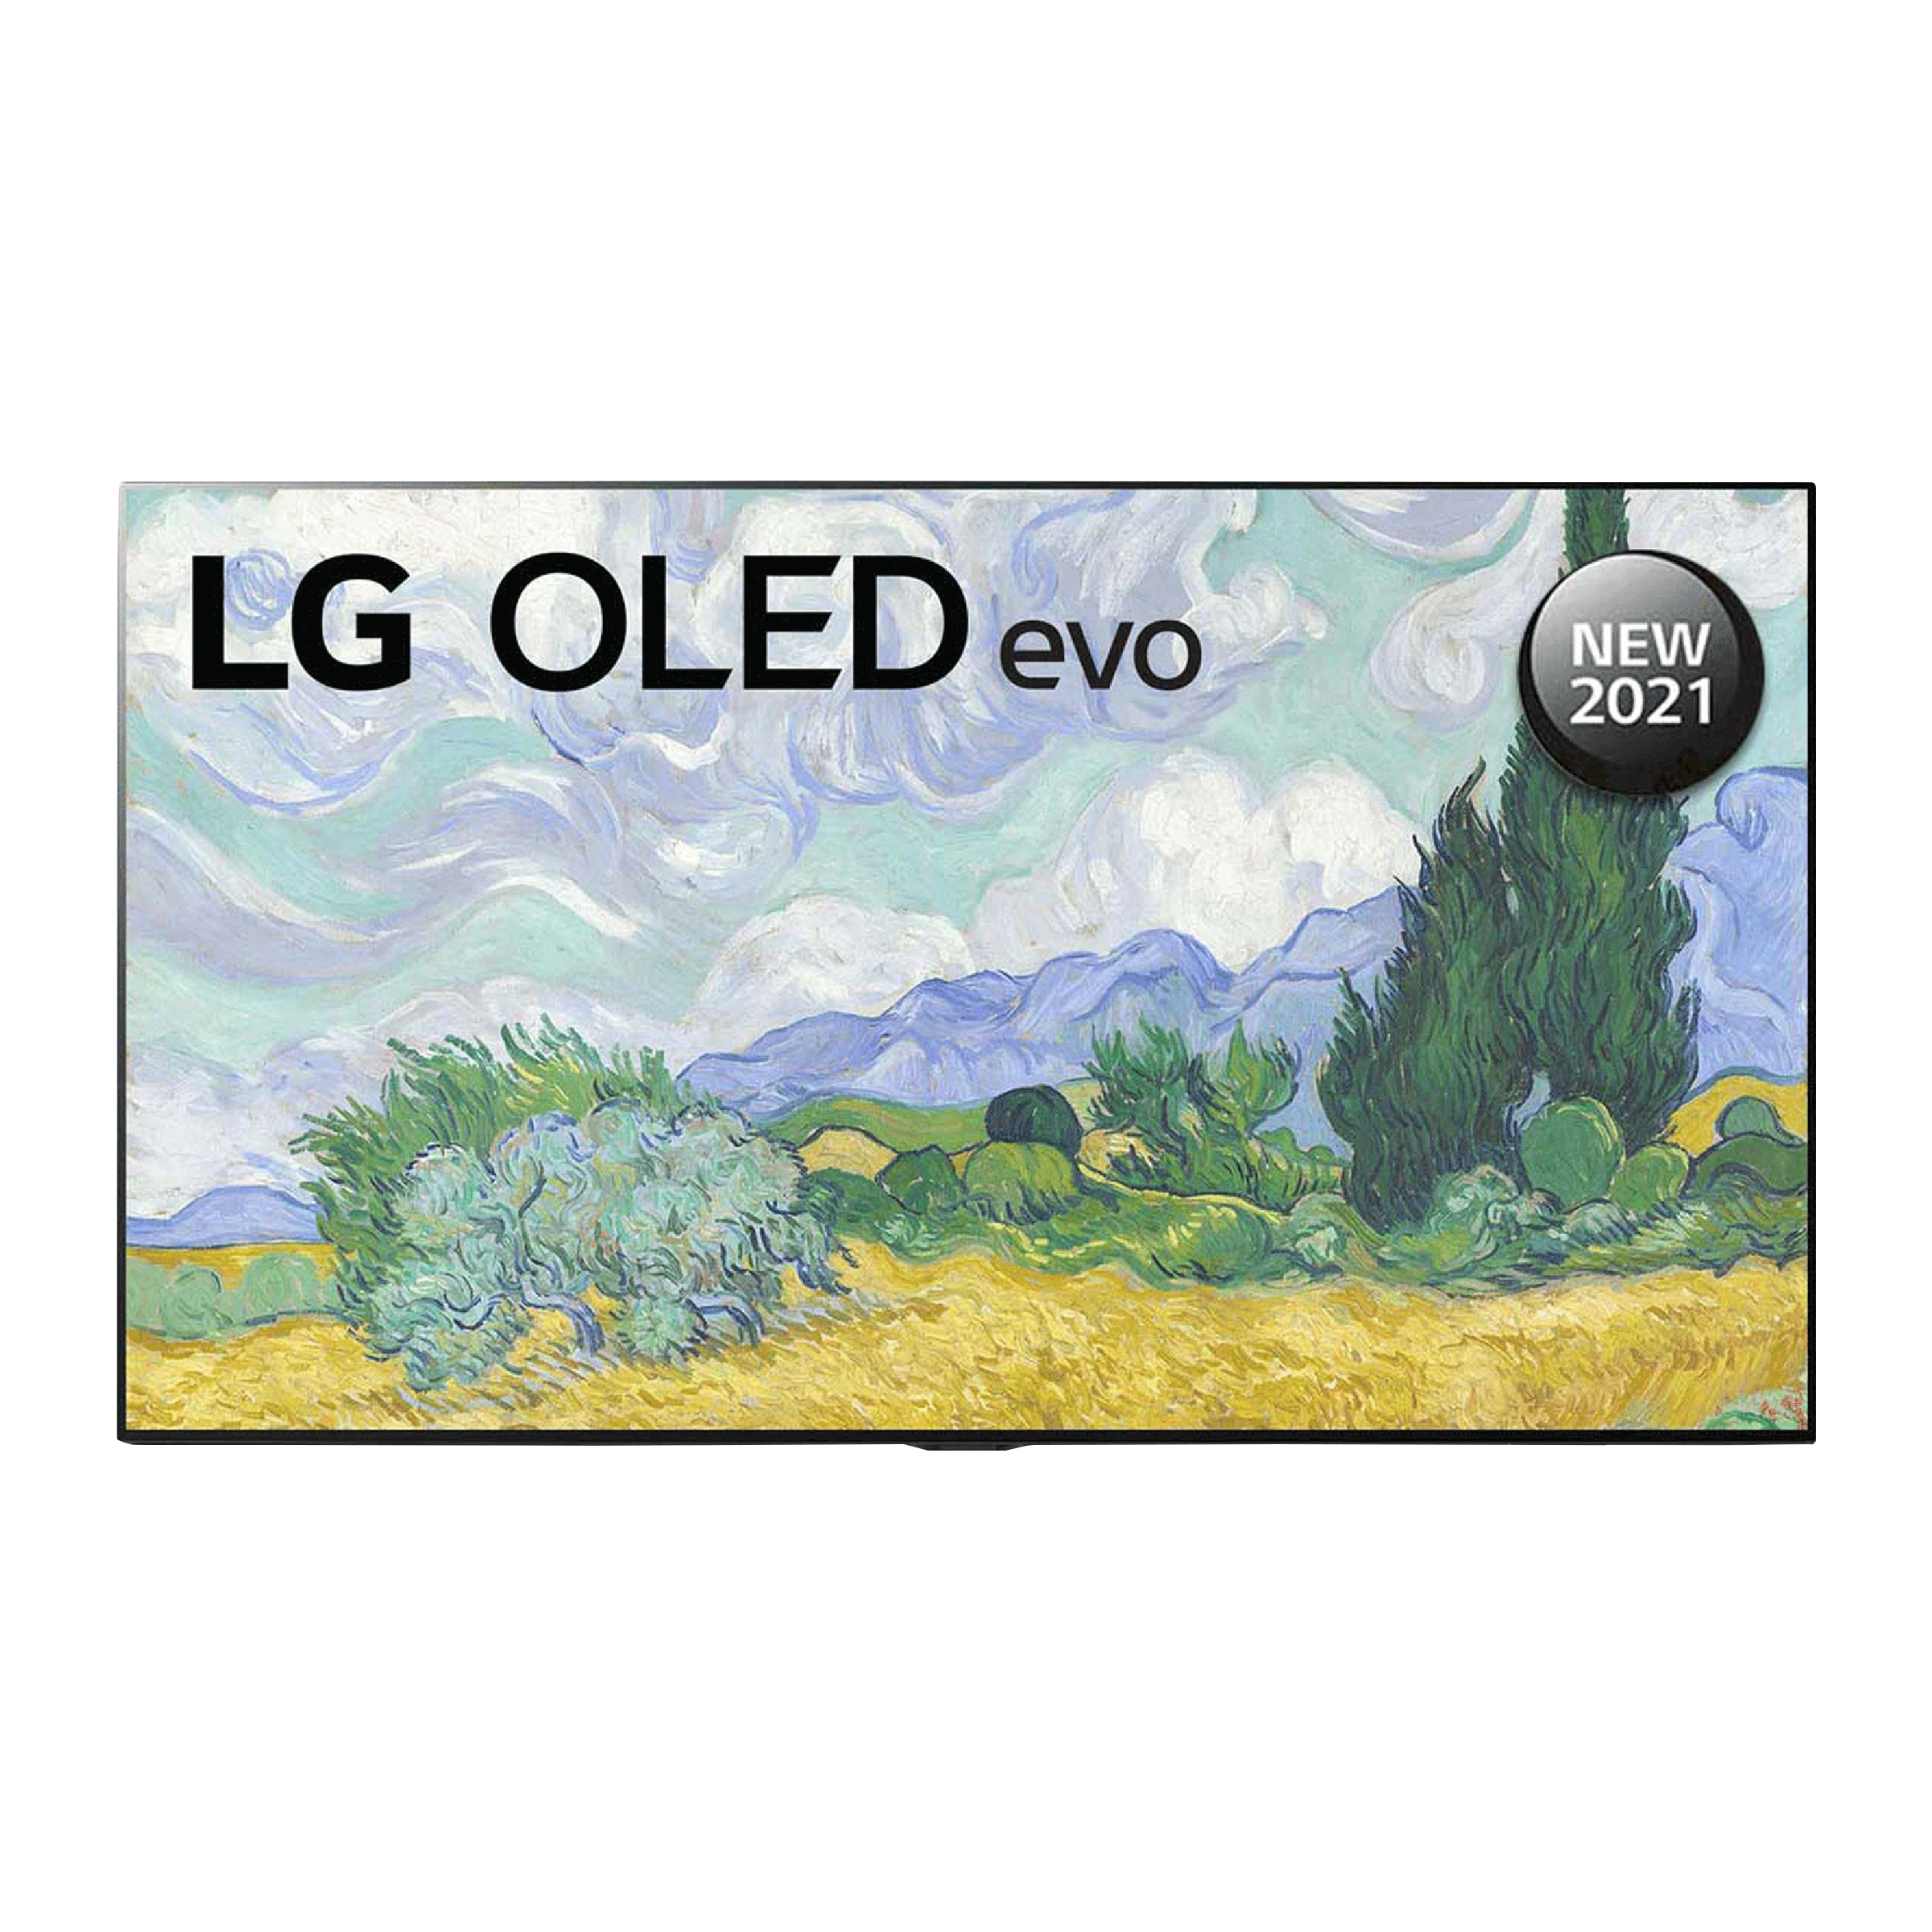 LG G1 195 cm (77 inch) OLED 4K Ultra HD WebOS TV with Alexa Compatibility (2021 model)_1